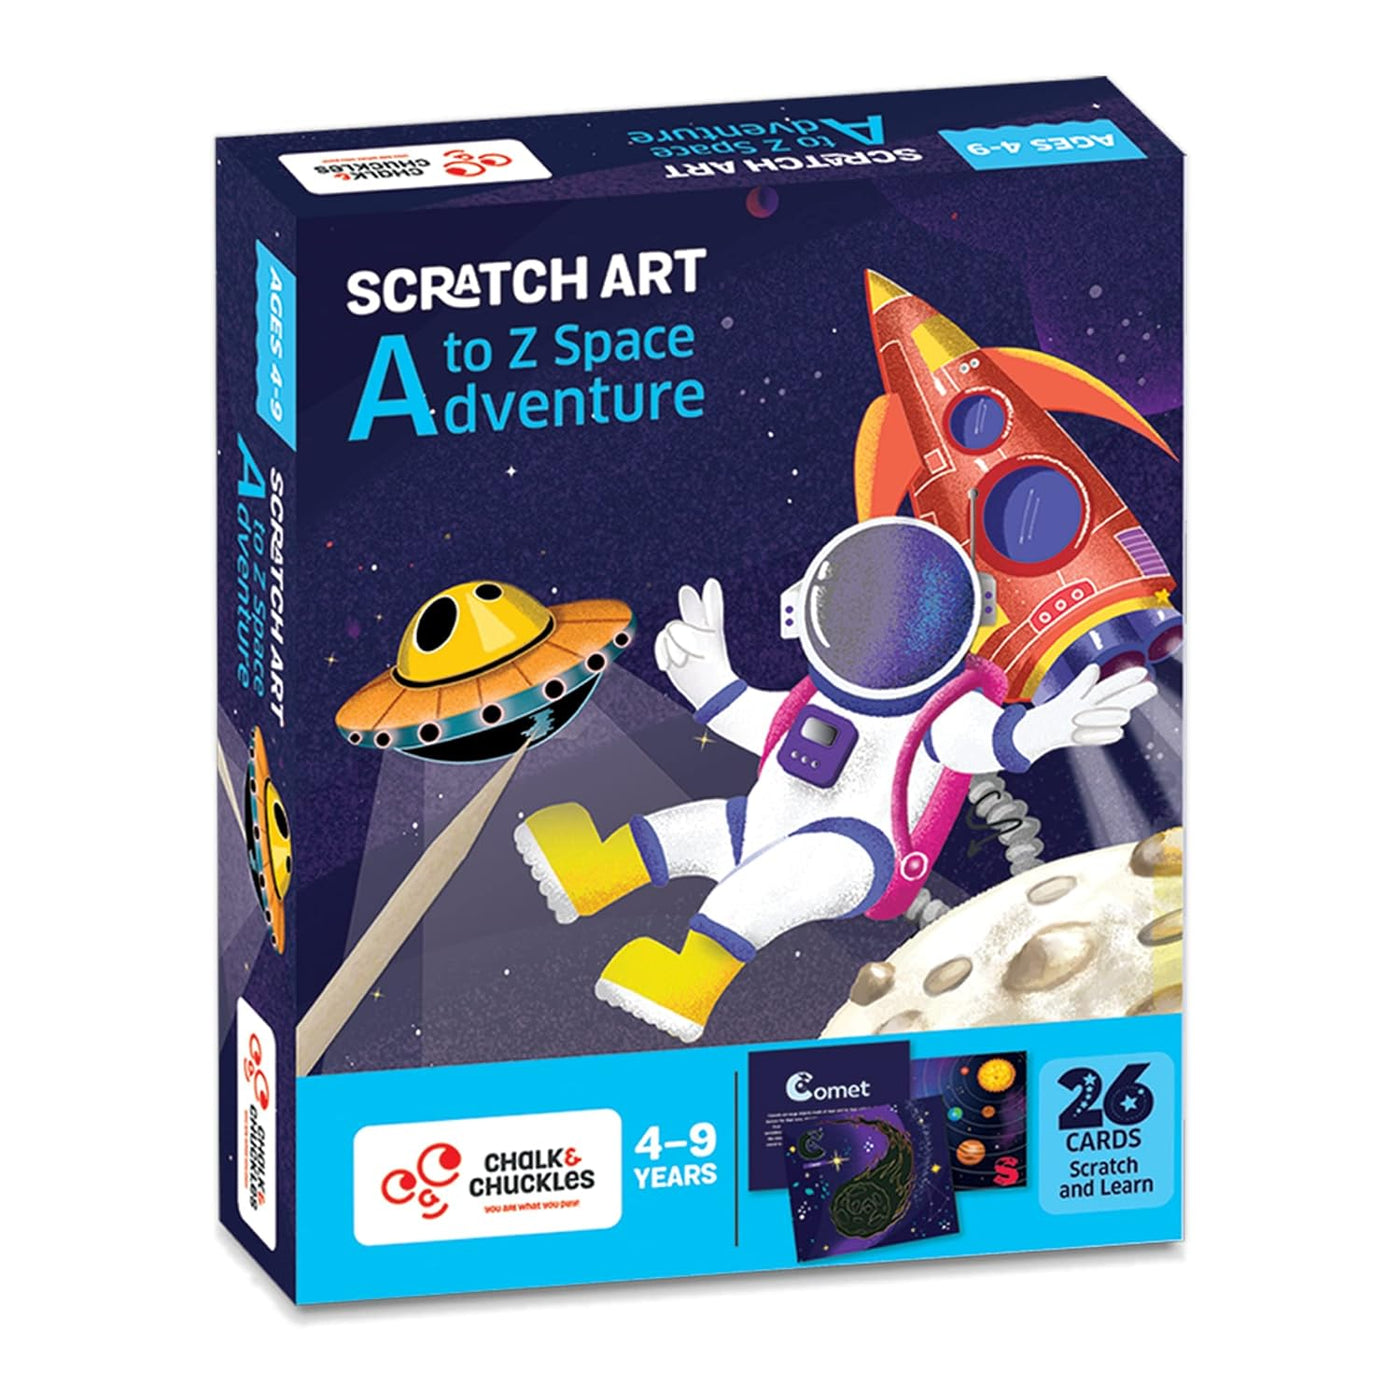 Chalk & Chuckles: Scratch Art - A to Z Space Adventure